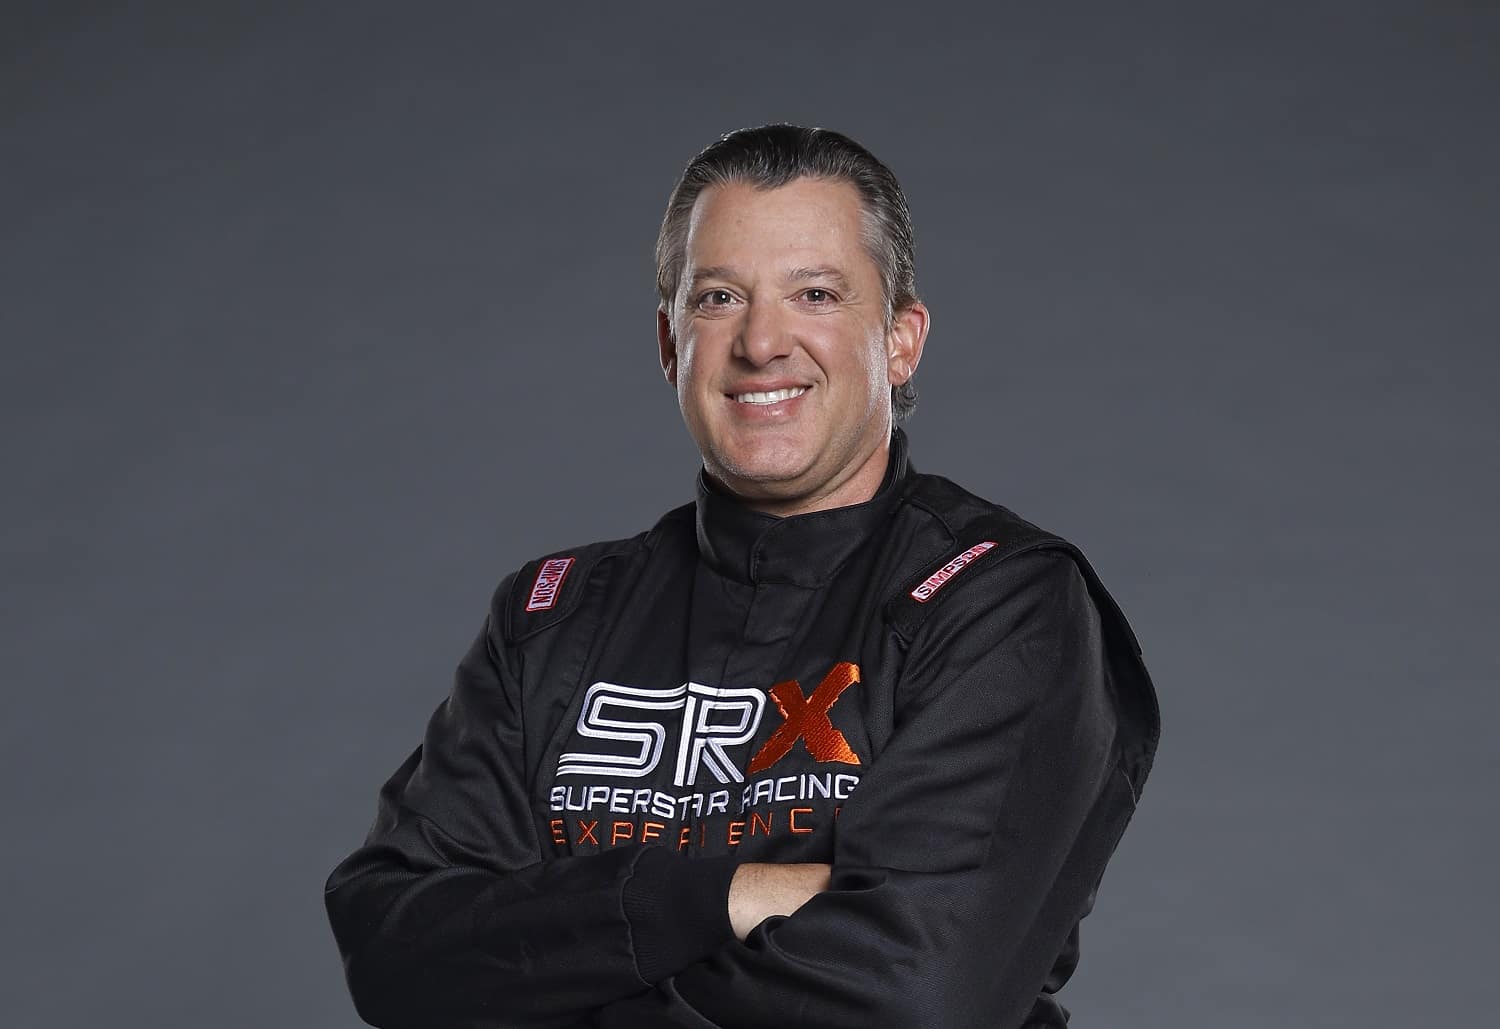 SRX driver Tony Stewart poses for a photo during the Superstar Racing Experience portrait shoot at Clutch Studios on April 25, 2023 in Huntersville, North Carolina.